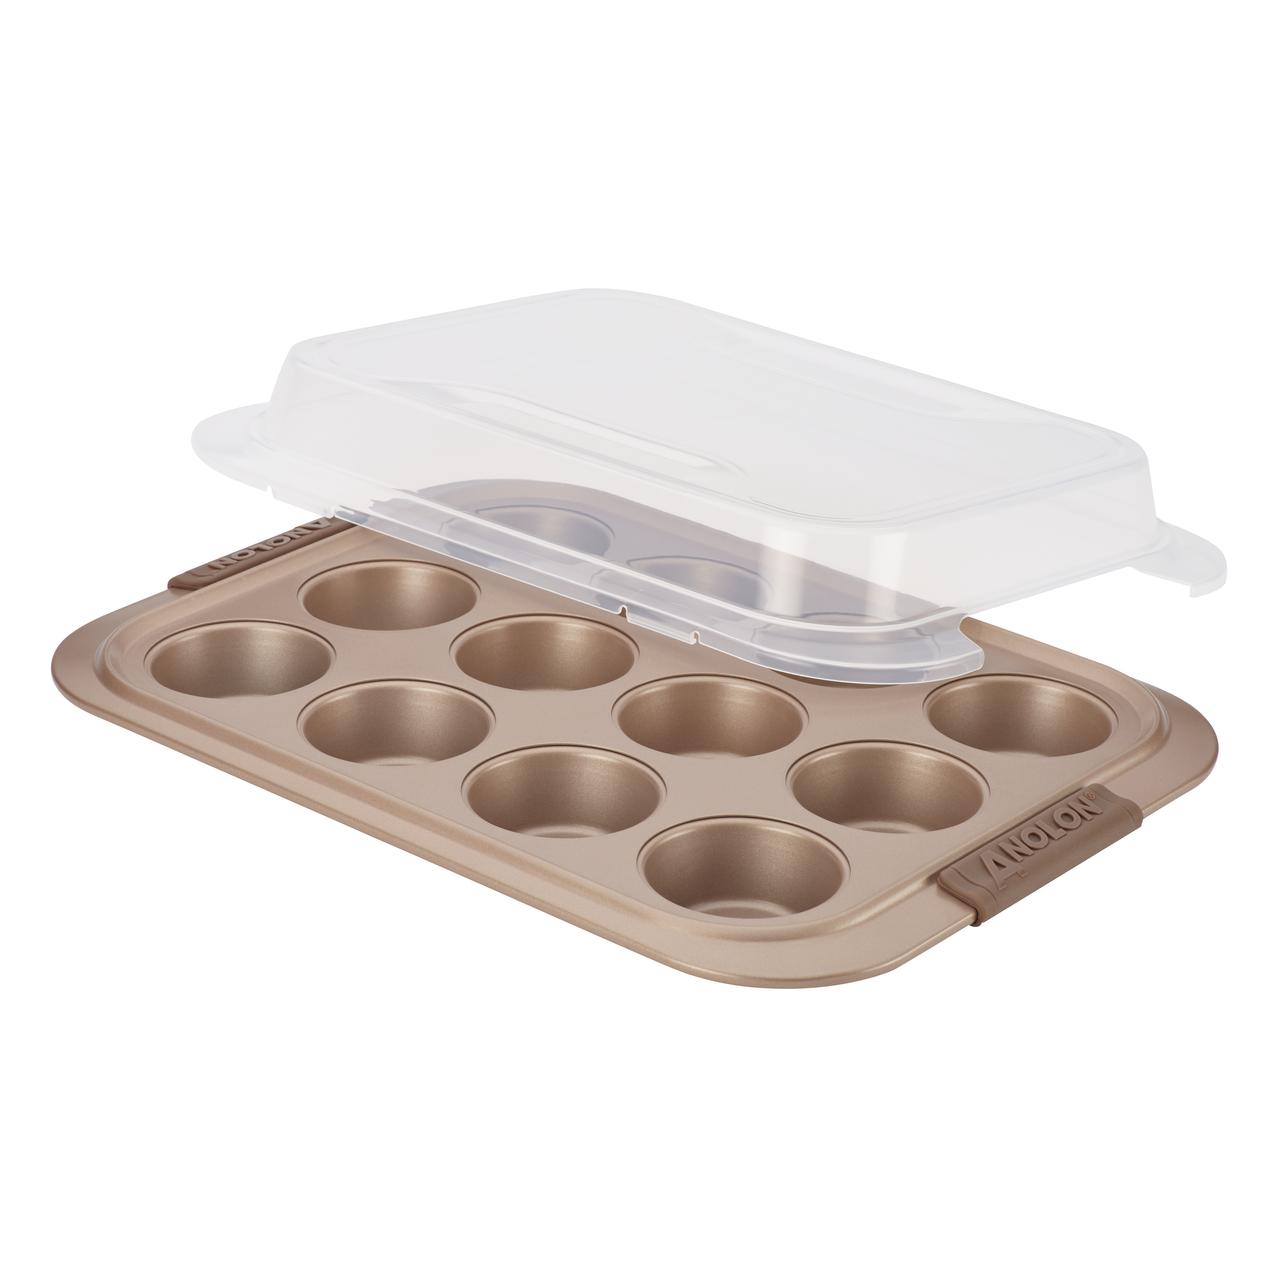 Anolon Advanced Bronze Nonstick Bakeware 12-Cup Muffin Pan with Silicone Grips - image 1 of 7